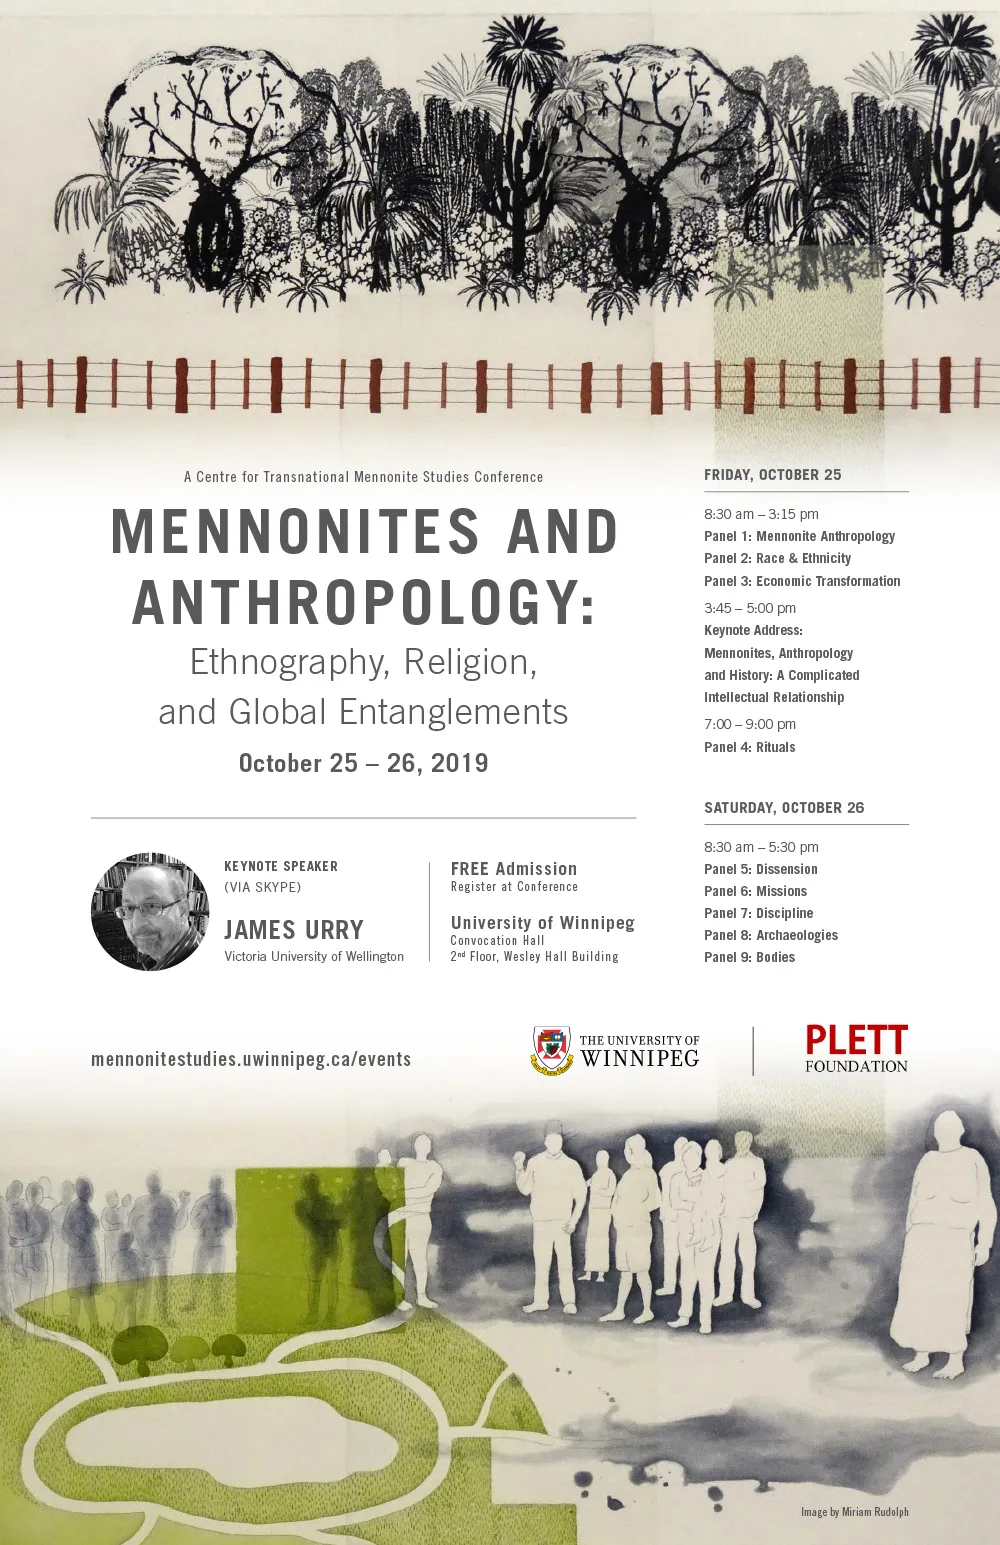 Featured image for “Mennonites and Anthropology: Ethnography, Religion, and Global Entanglements”